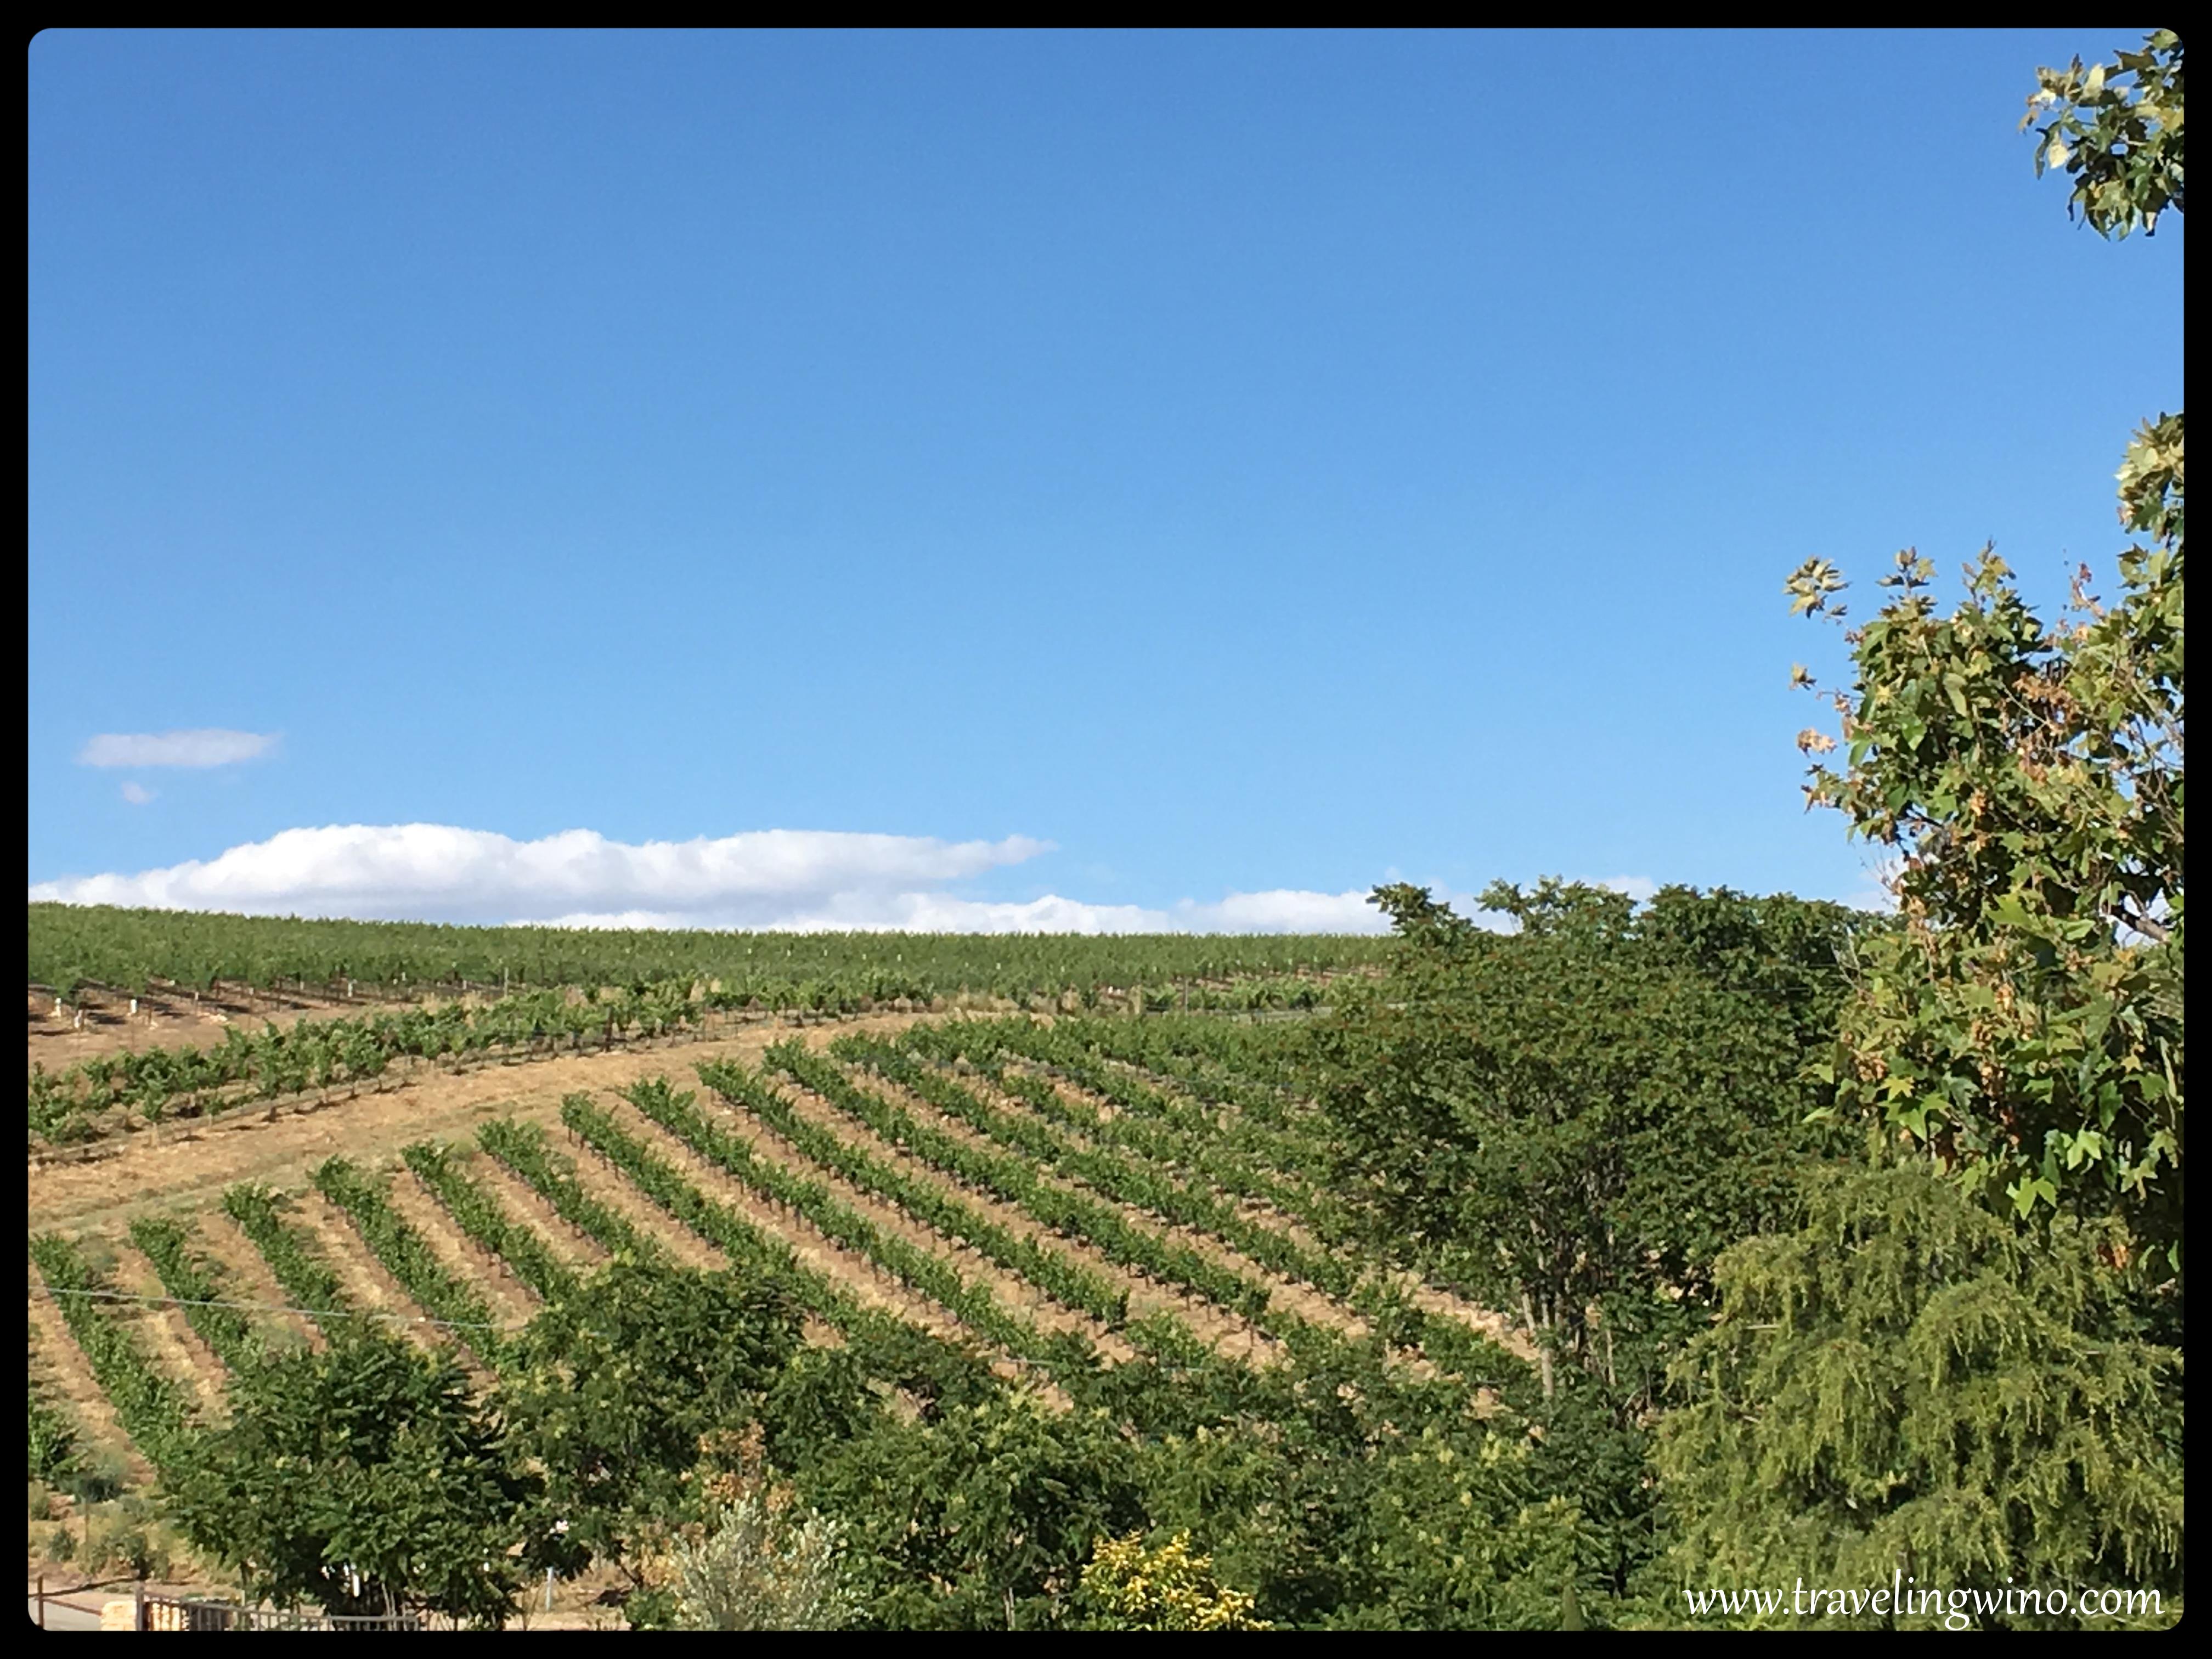 Traveling in Paso Robles Wine Country